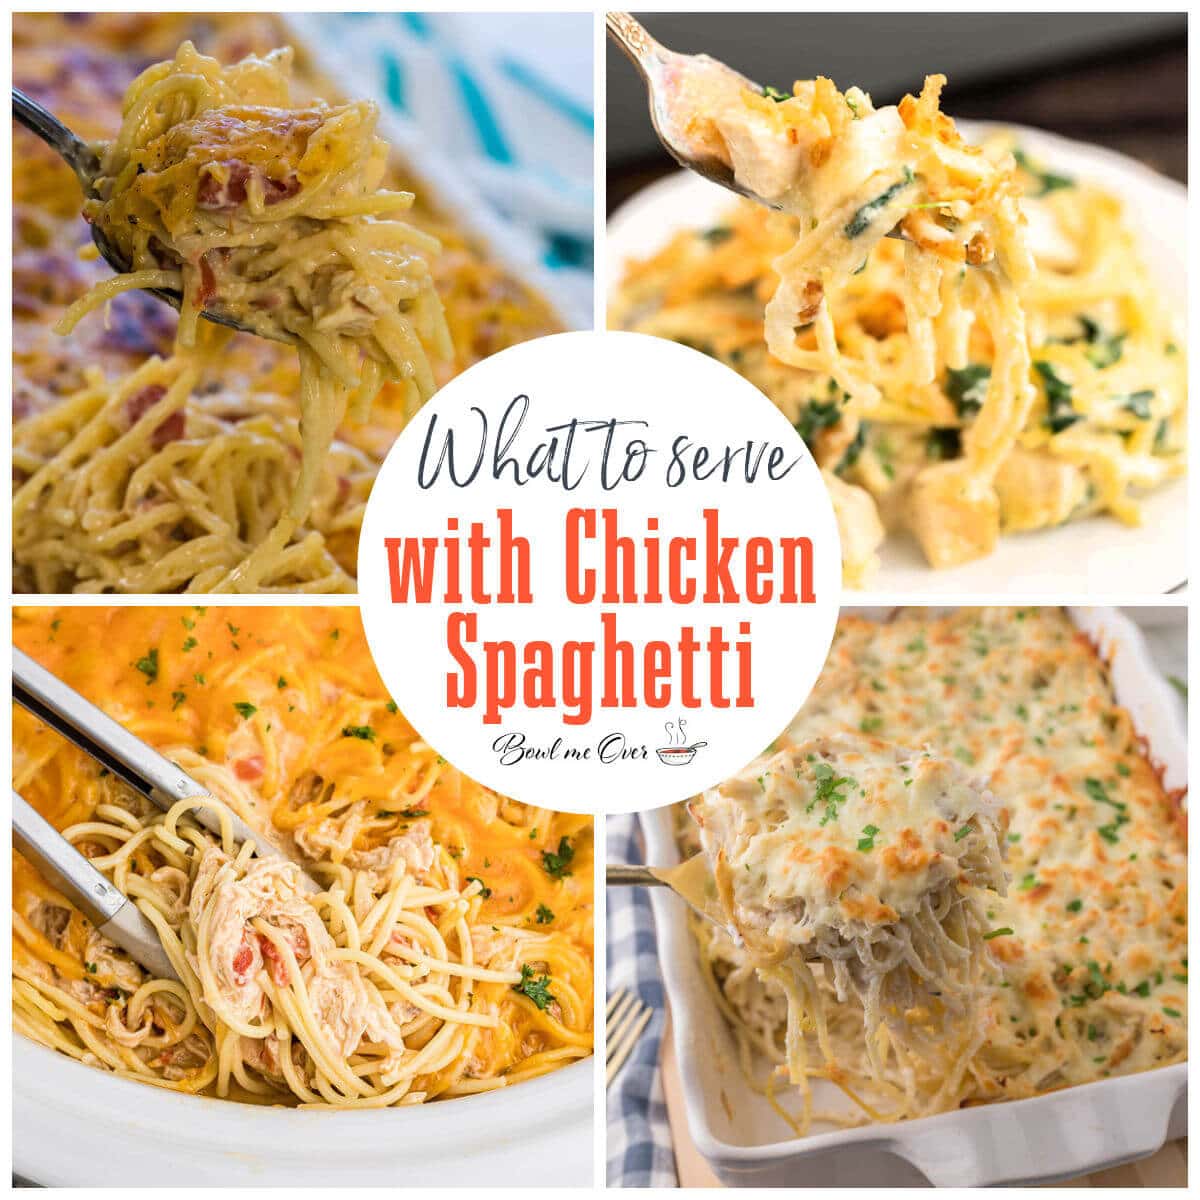 Photos of chicken spaghetti recipes, with print overlay asking what to serve with chicken spaghetti.